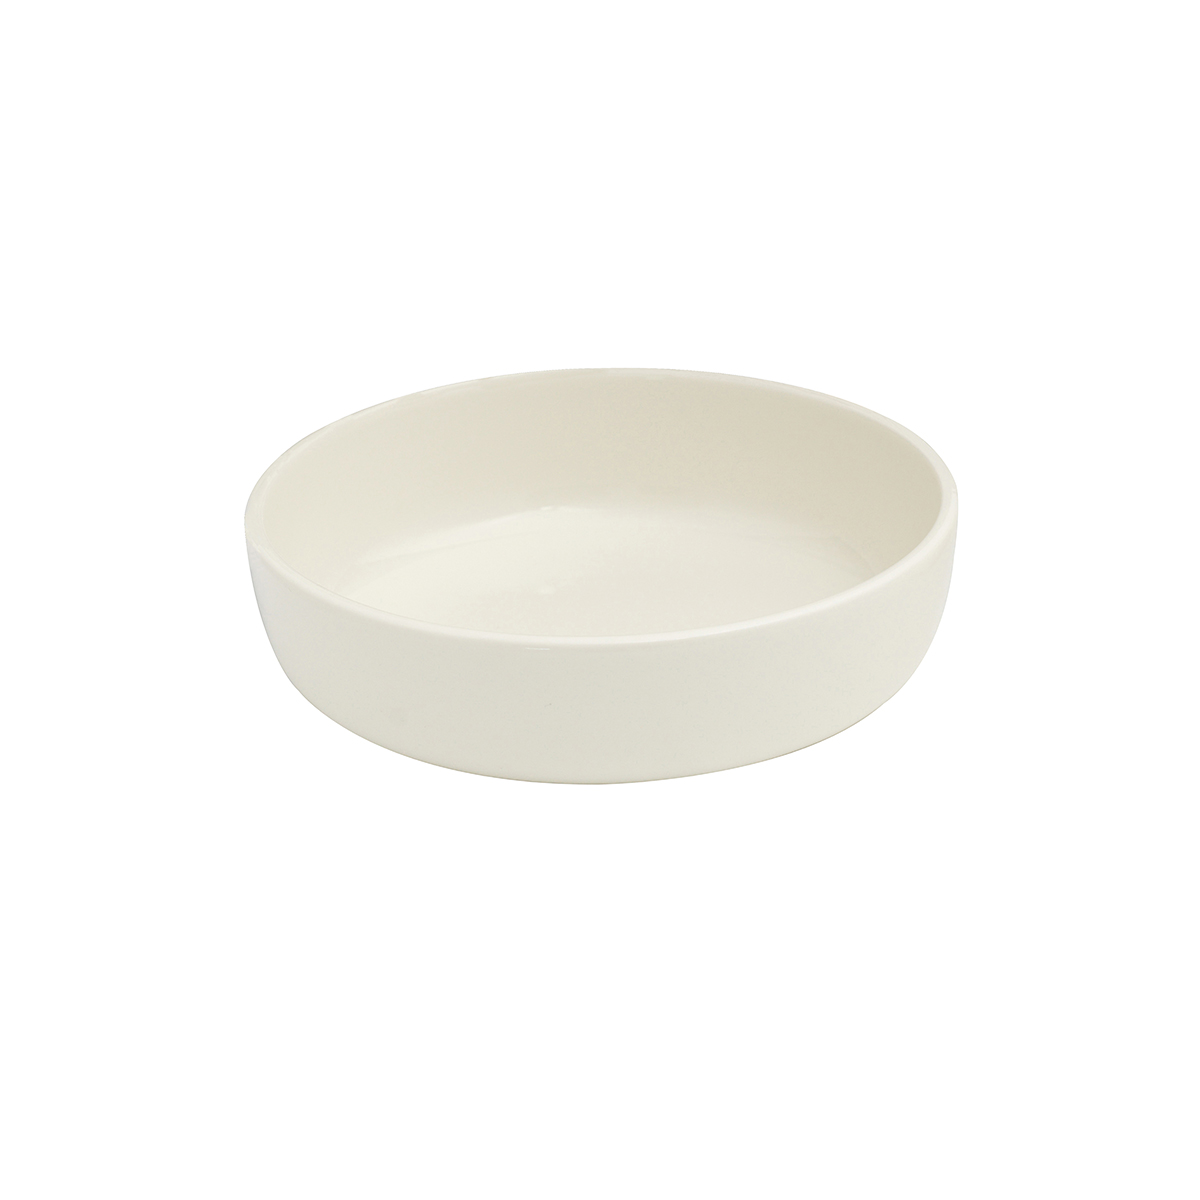 EASE IVORY ROUND BOWLS